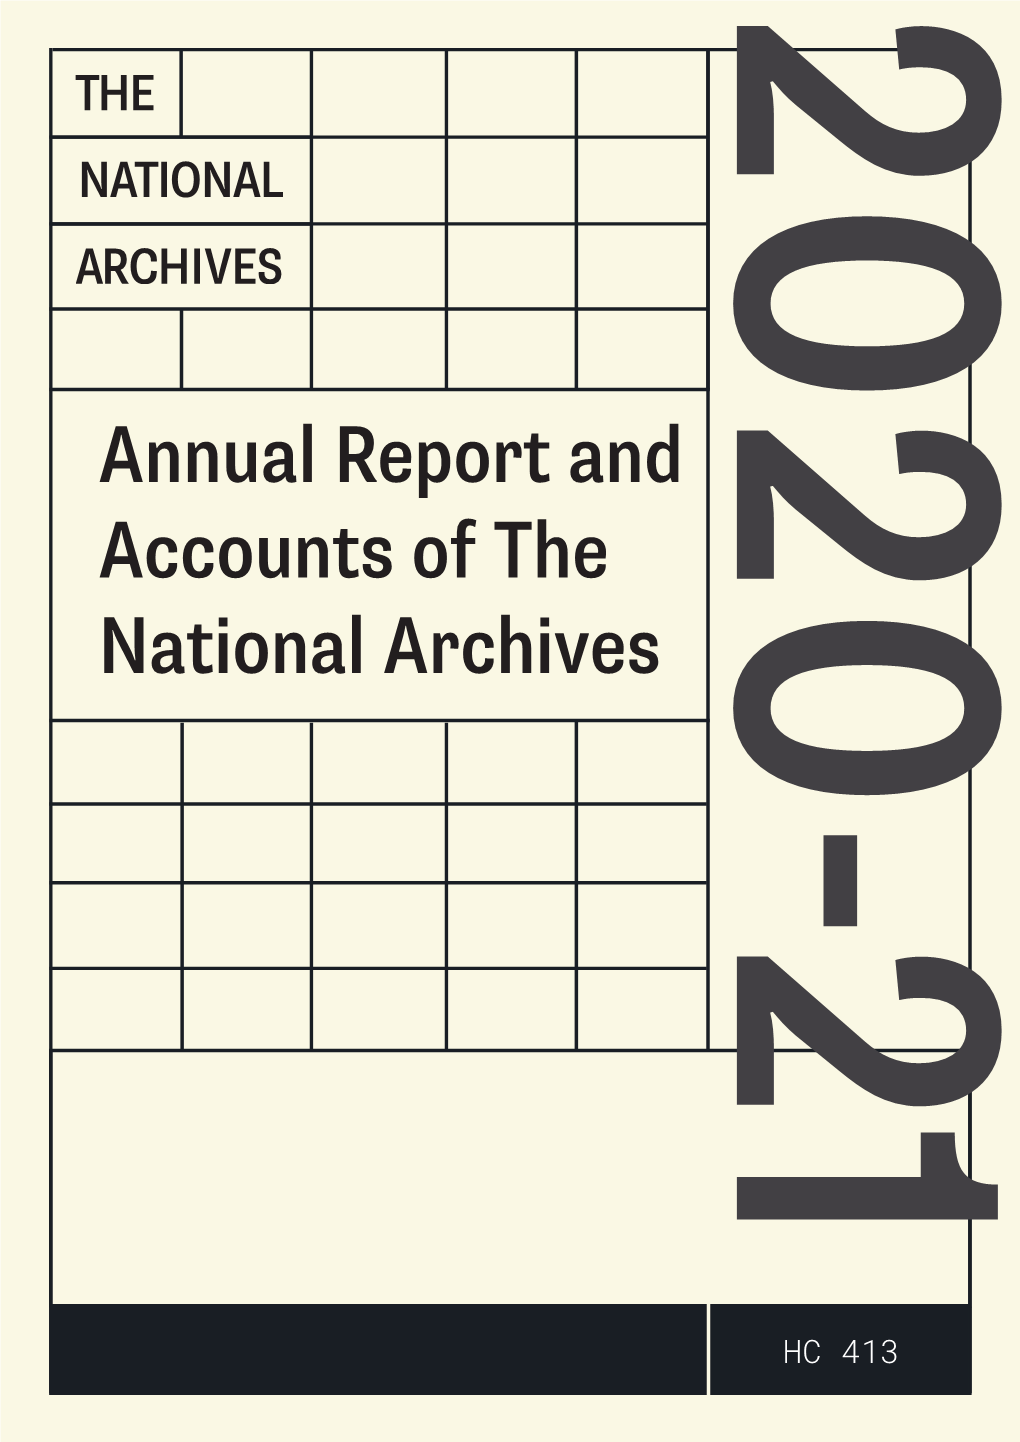 Annual Report and Accounts of the National Archives 2020-21